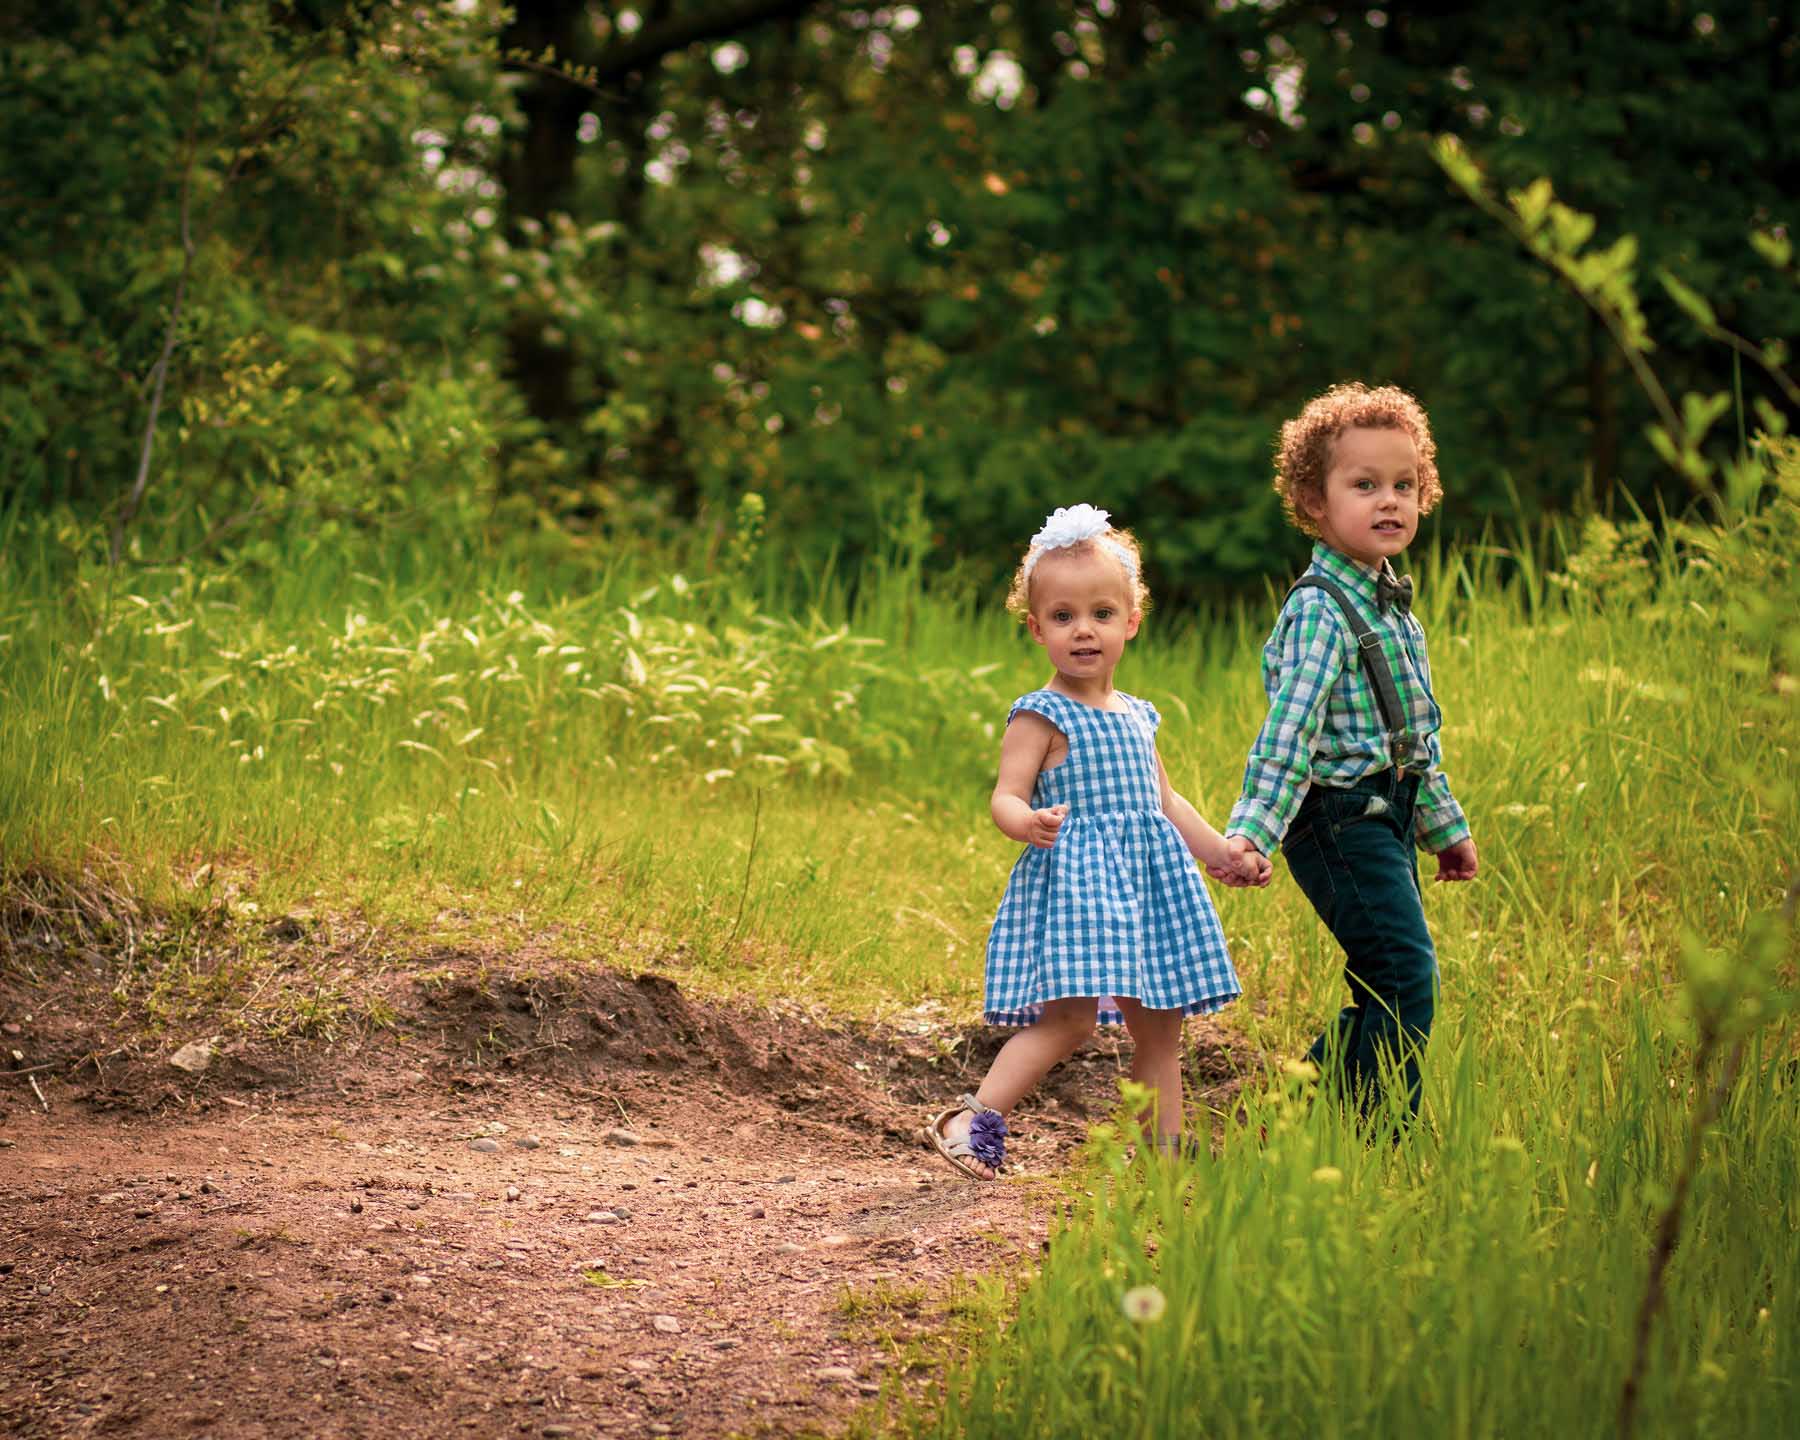 brother and sister holding hands in field minneapolis minnesota family photographer